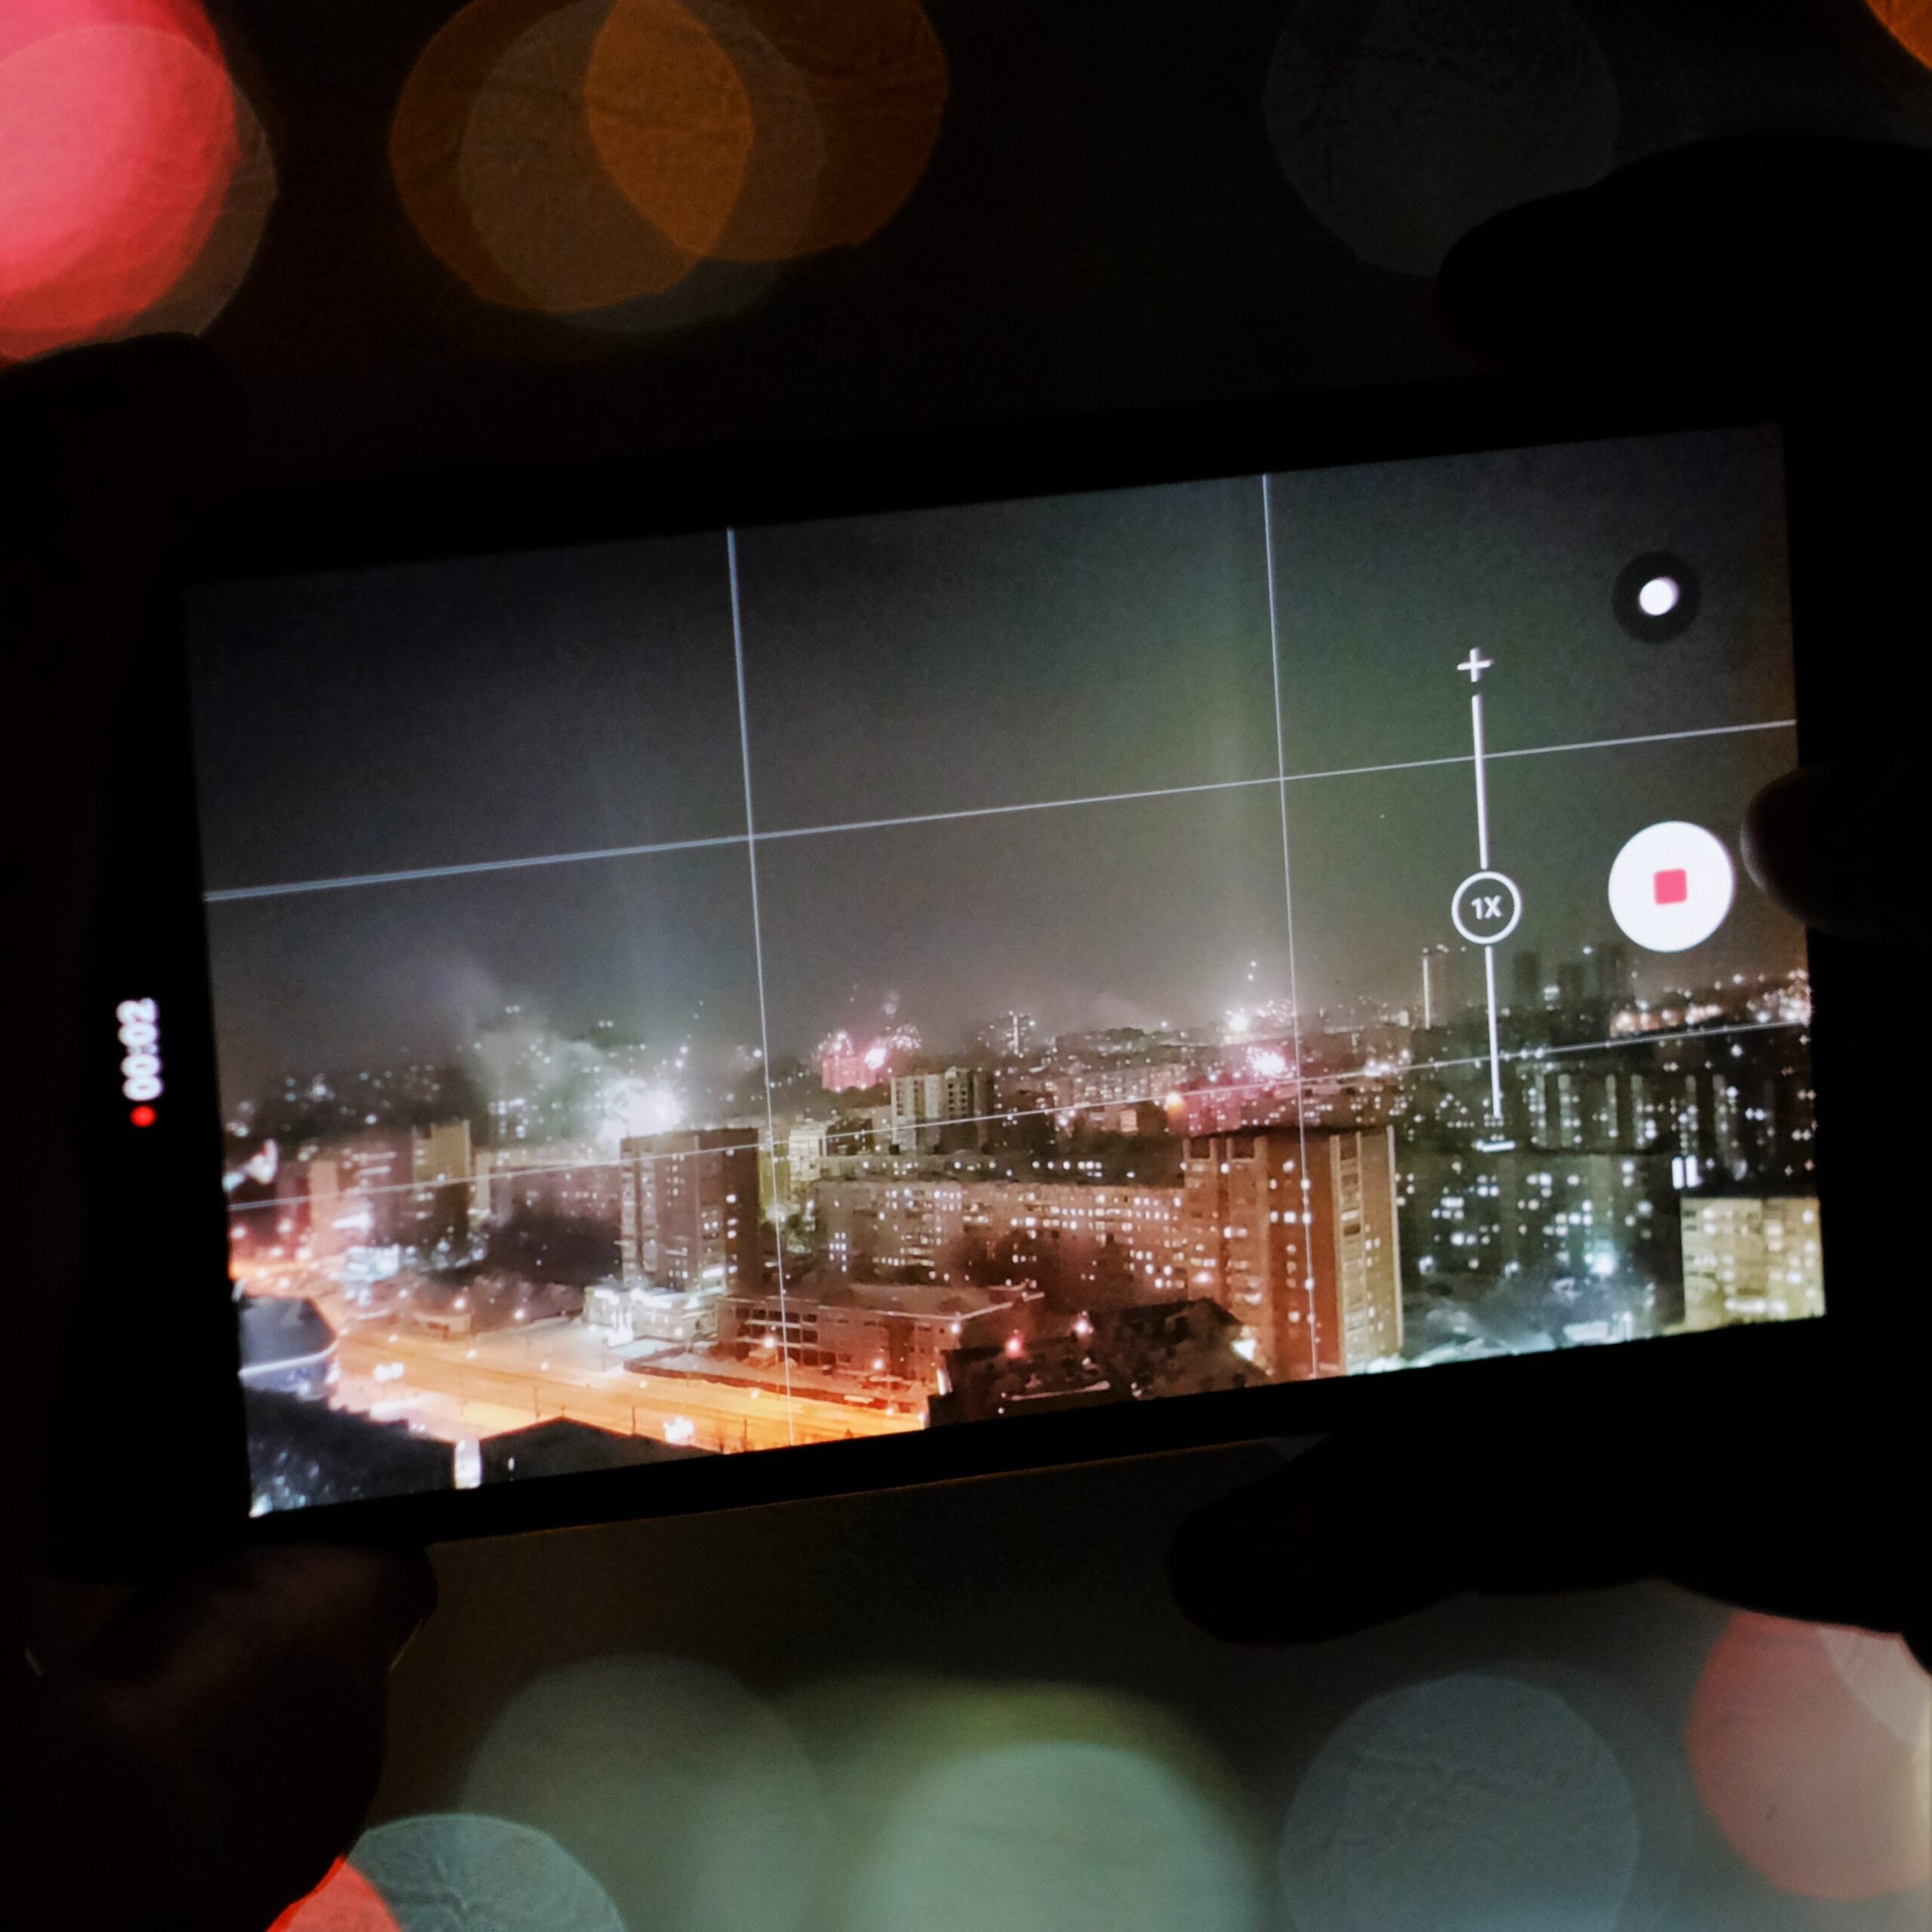 Shoot like a pro with your smartphone